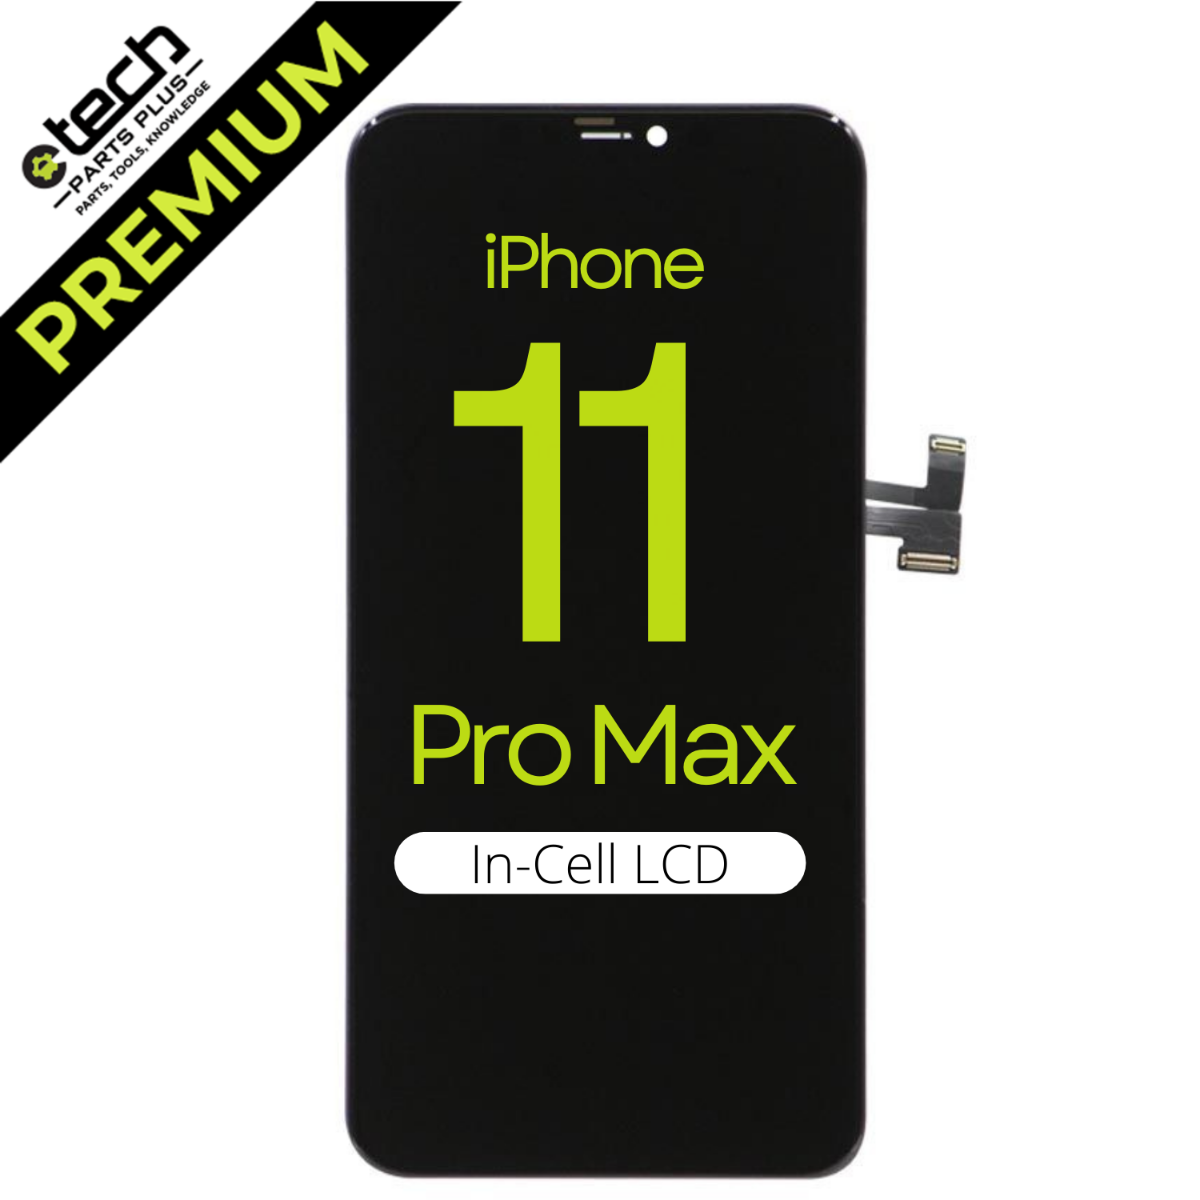 Got Repair? iPhone 11 Pro Max - Screen Replacement (Incell LCD)